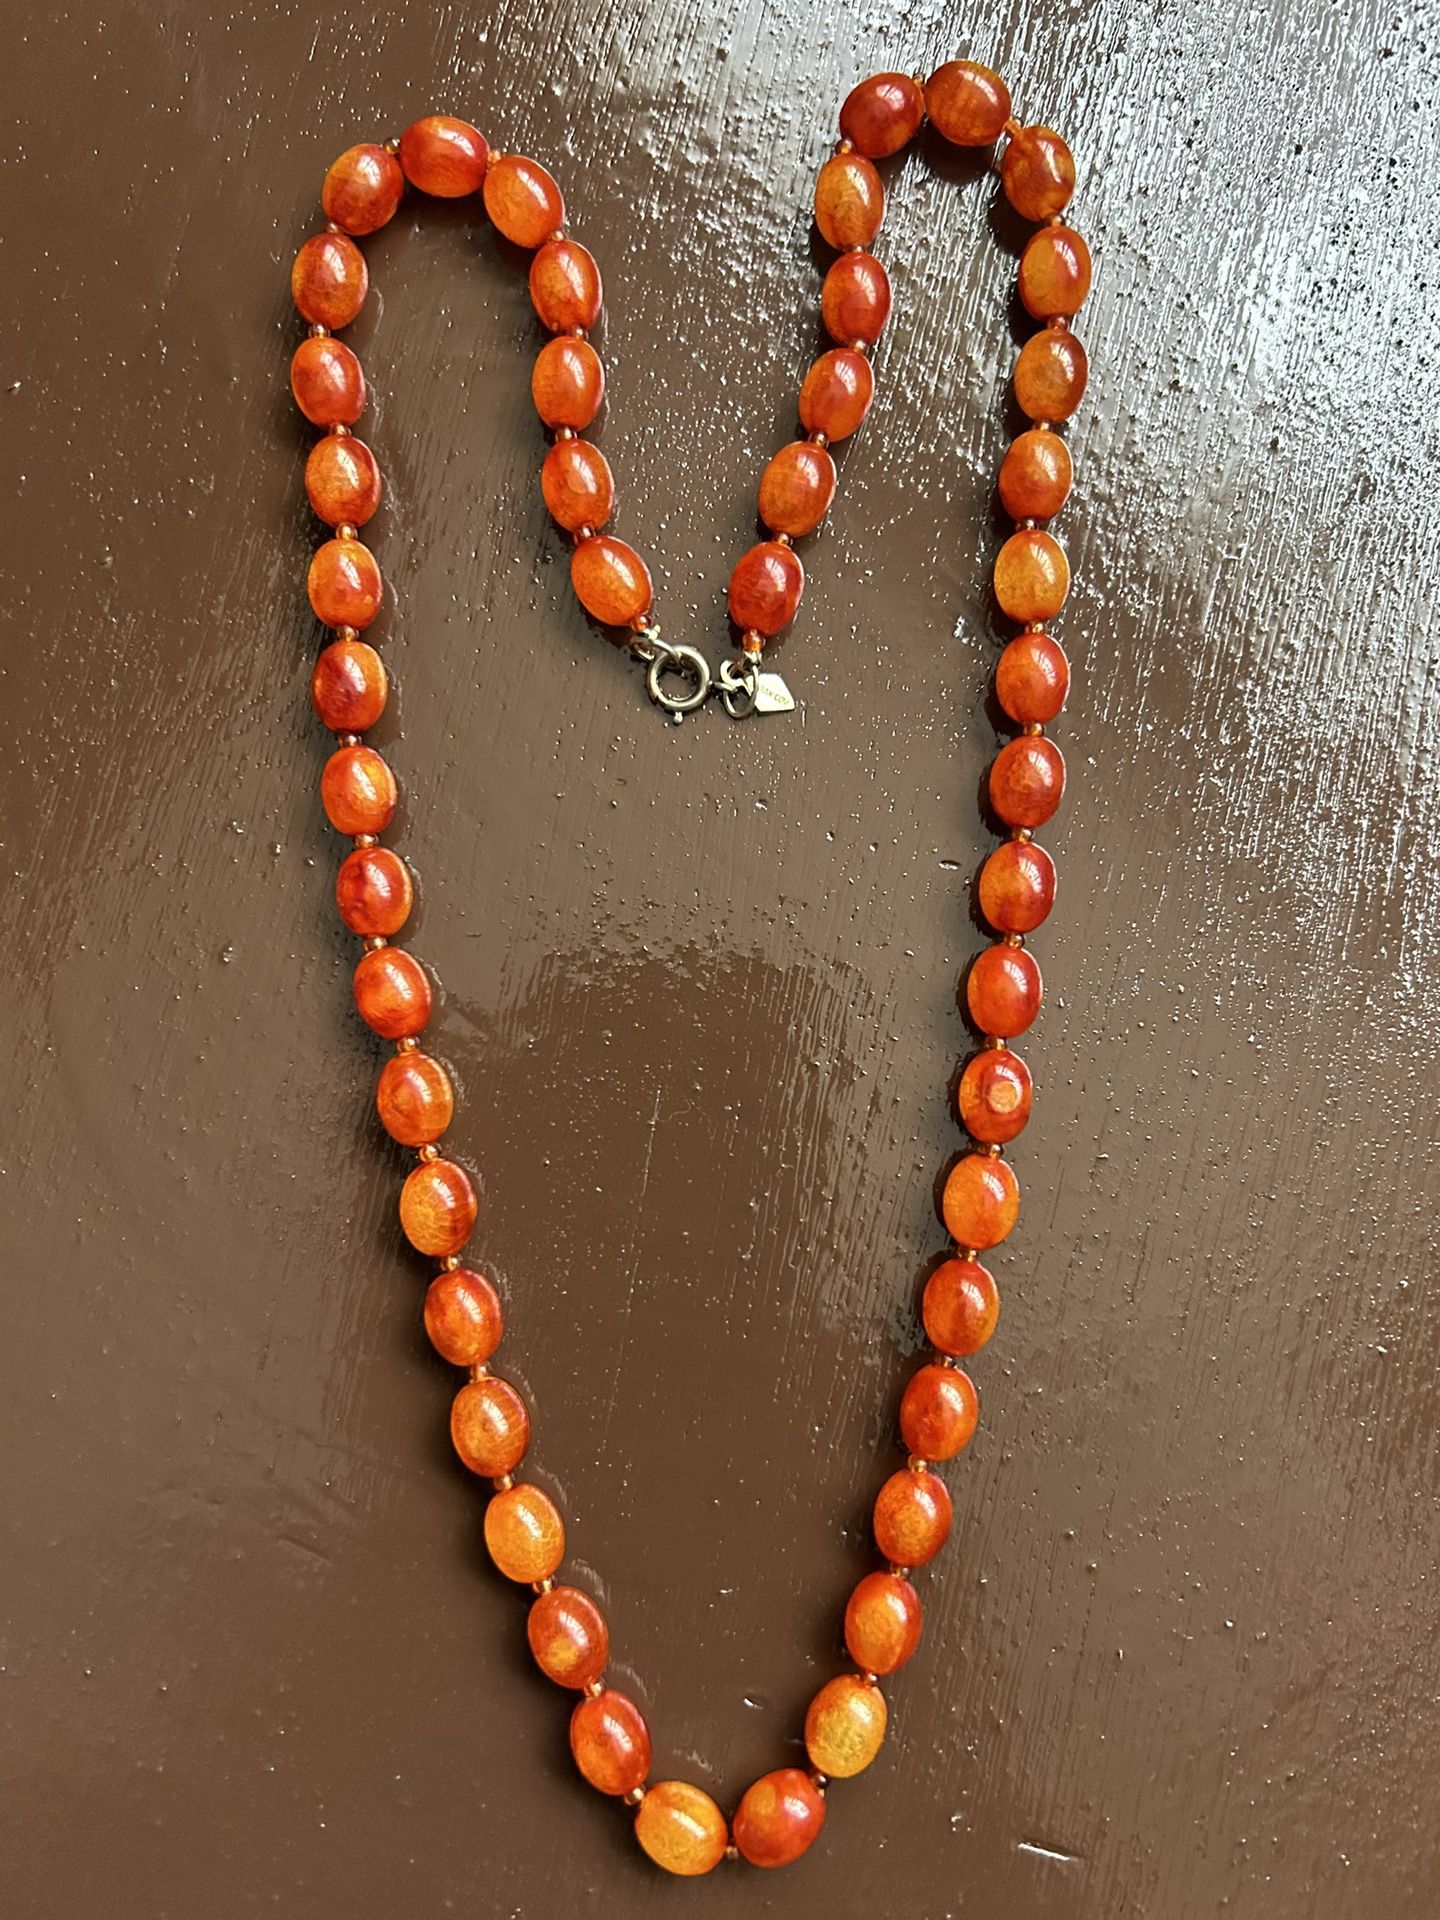 VINTAGE SARAH COV AMBER RESIN BEADS NECKLACE FOR SALE